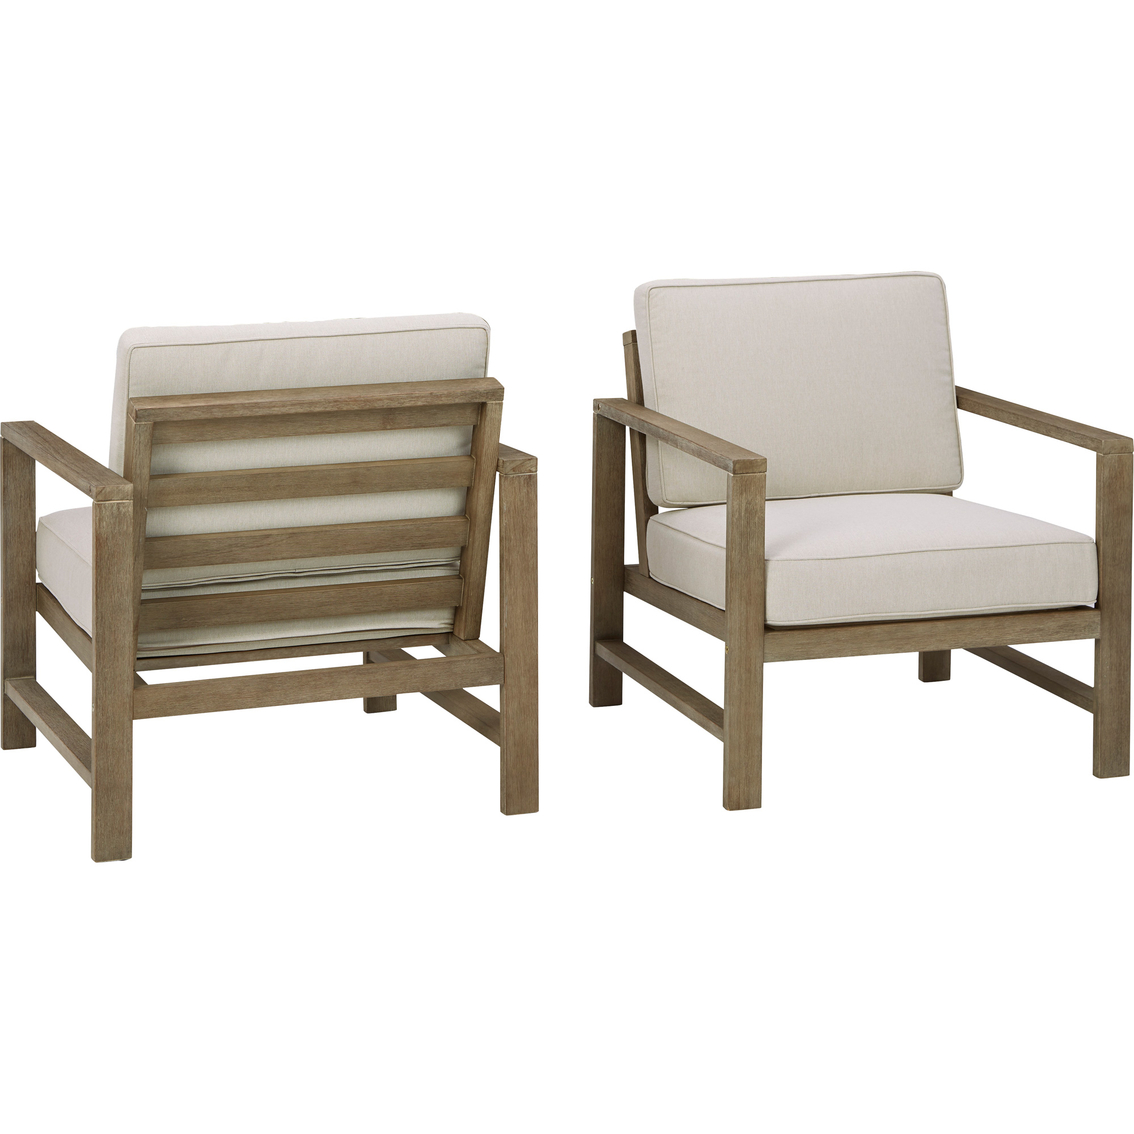 Signature Design by Ashley Fynnegan Lounge Chair 2 pk. - Image 2 of 4